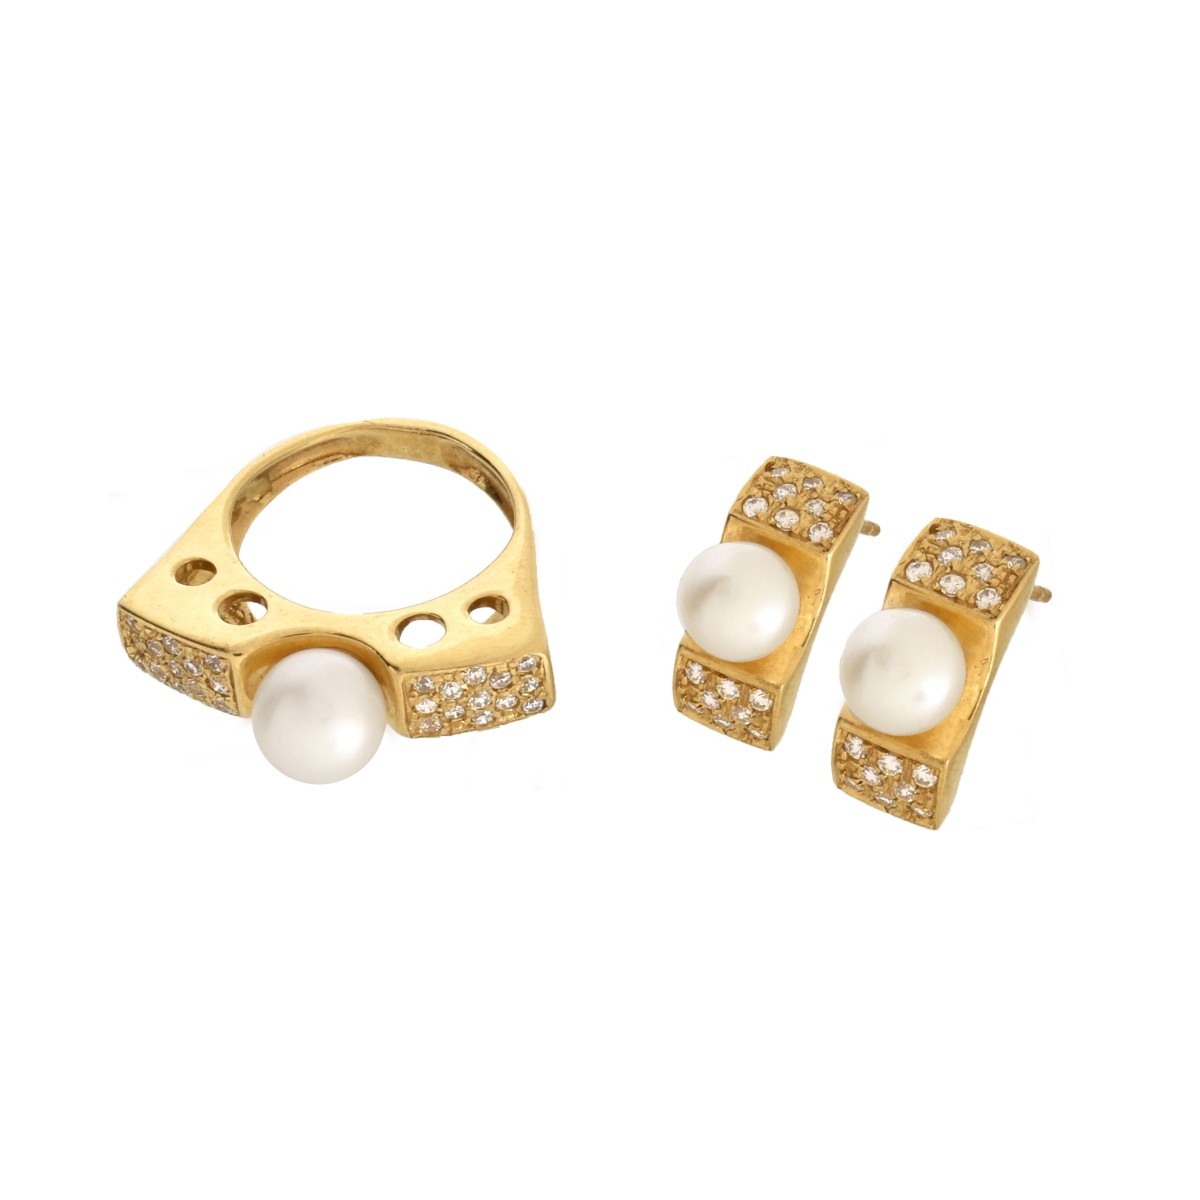 Pearl, Diamond and 18K Ring and Earrings